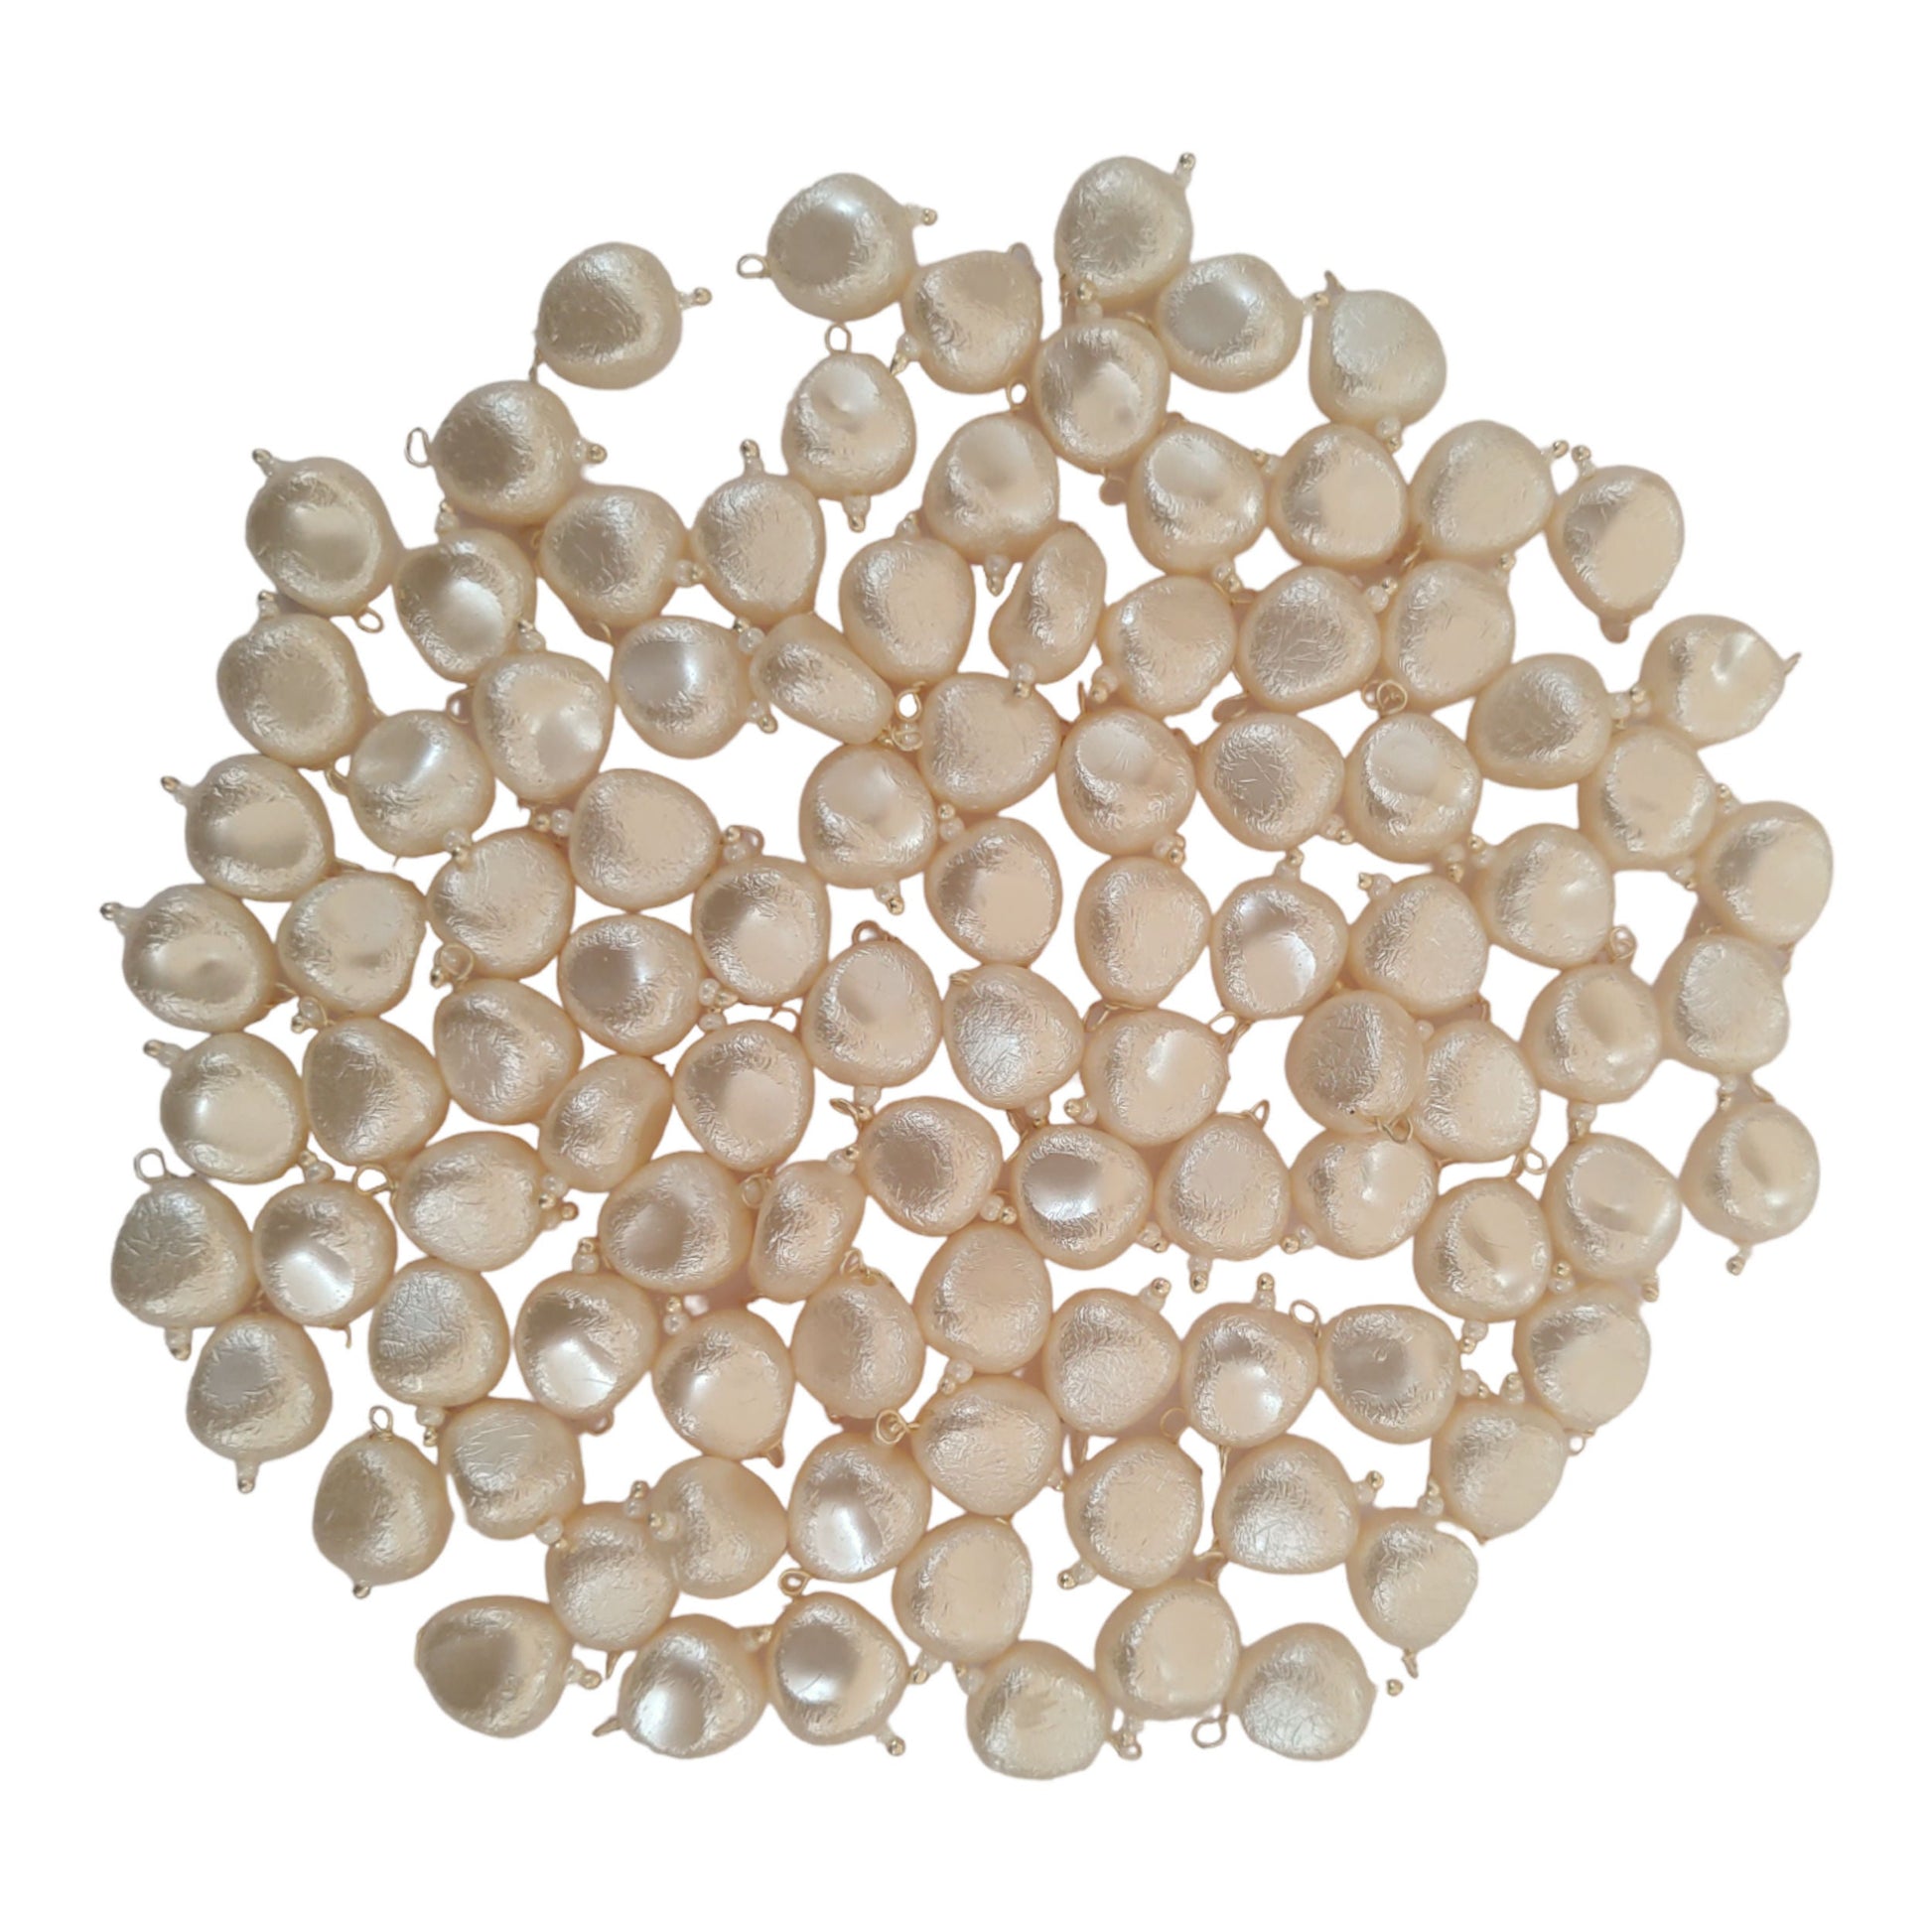 Indian Petals Colored ABS Seed Shaped Beads Ideal for Jewelry designing, Craft Making or Decor